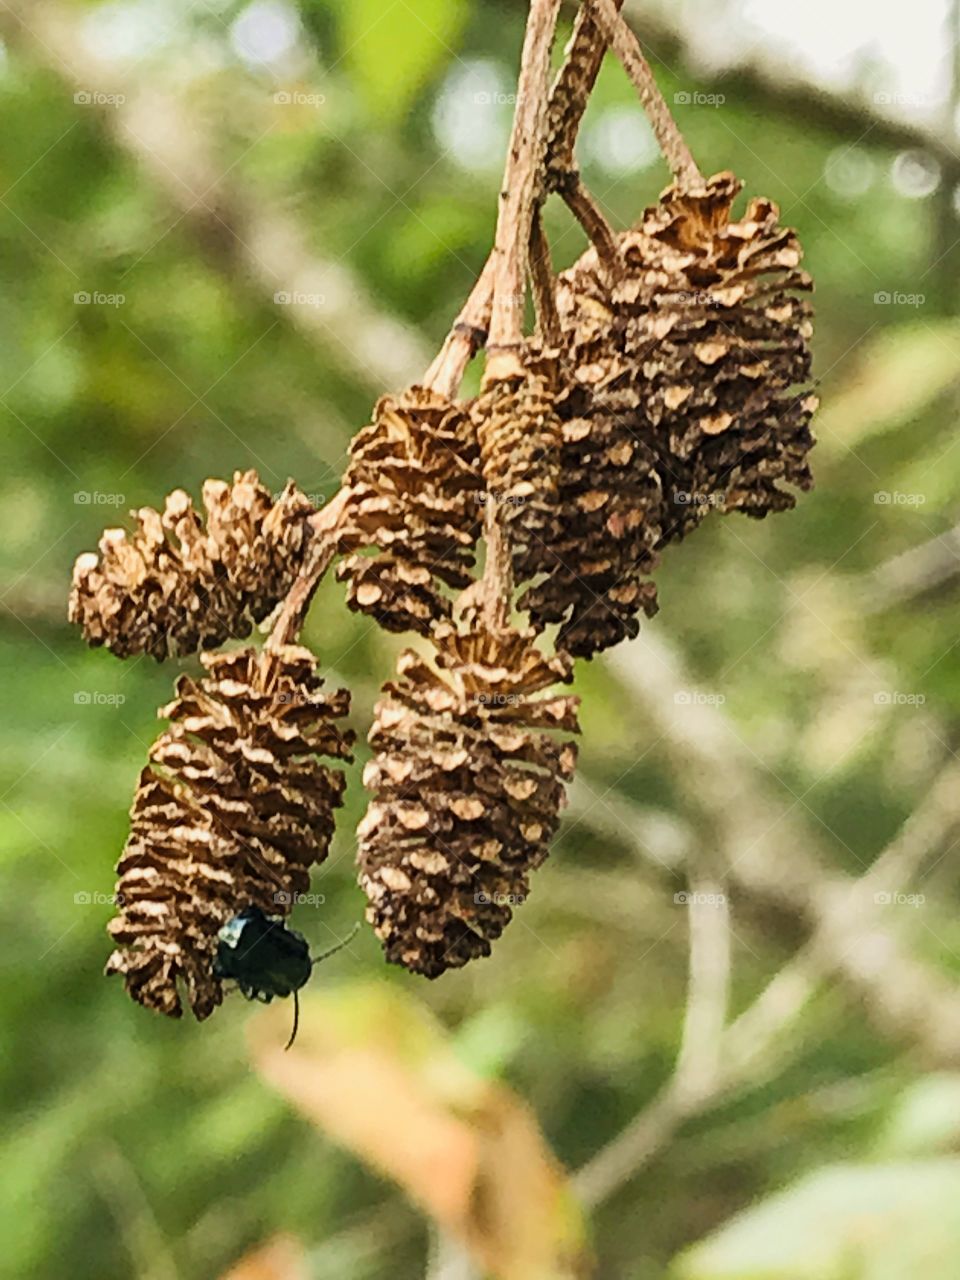 These cones, or strobiles, are the fruit of a deciduous Alder tree (Sp. Alnus) & are quite small, approx 1” or 2.5 cm. There is also what looks like a small metallic blue invasive Alder leaf beetle, (Agelastica alni), on the lowest center cone. 